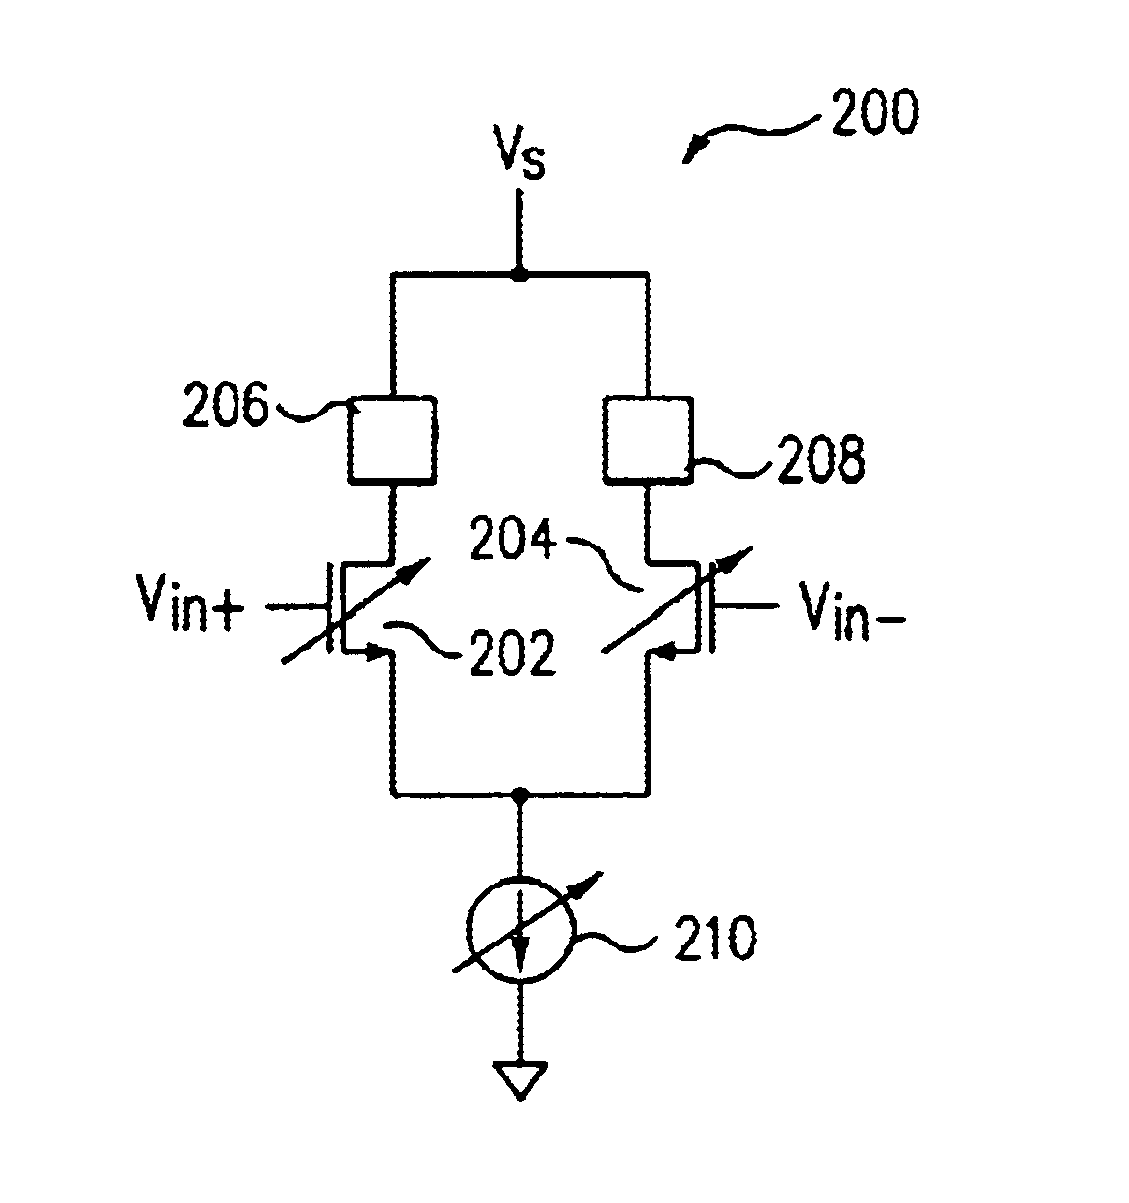 Digitally controlled transconductance cell